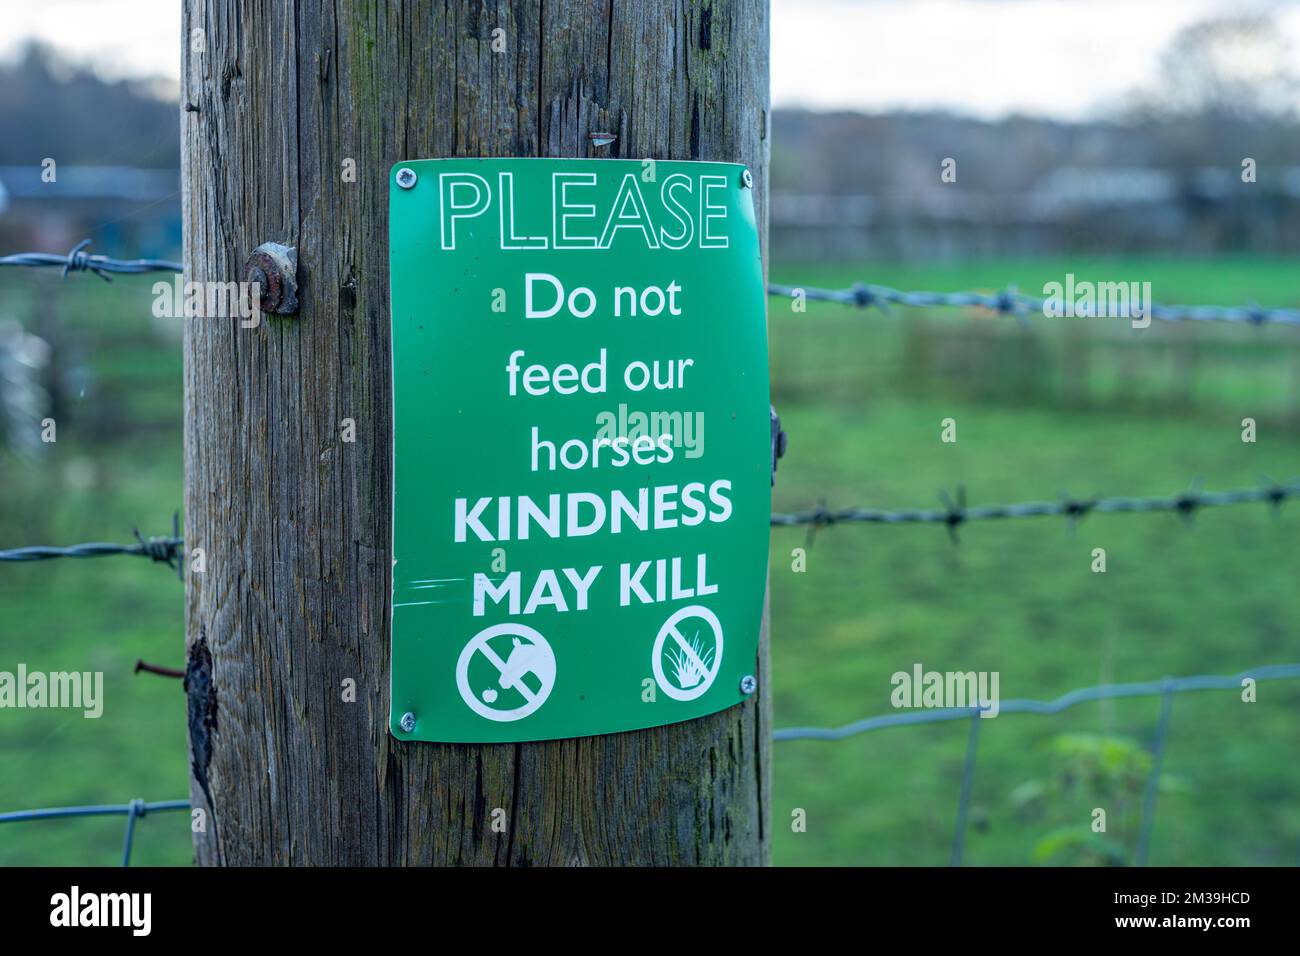 Green sign on fencepost warning people to not feed horses due to choking hazards, England, UK Stock Photo